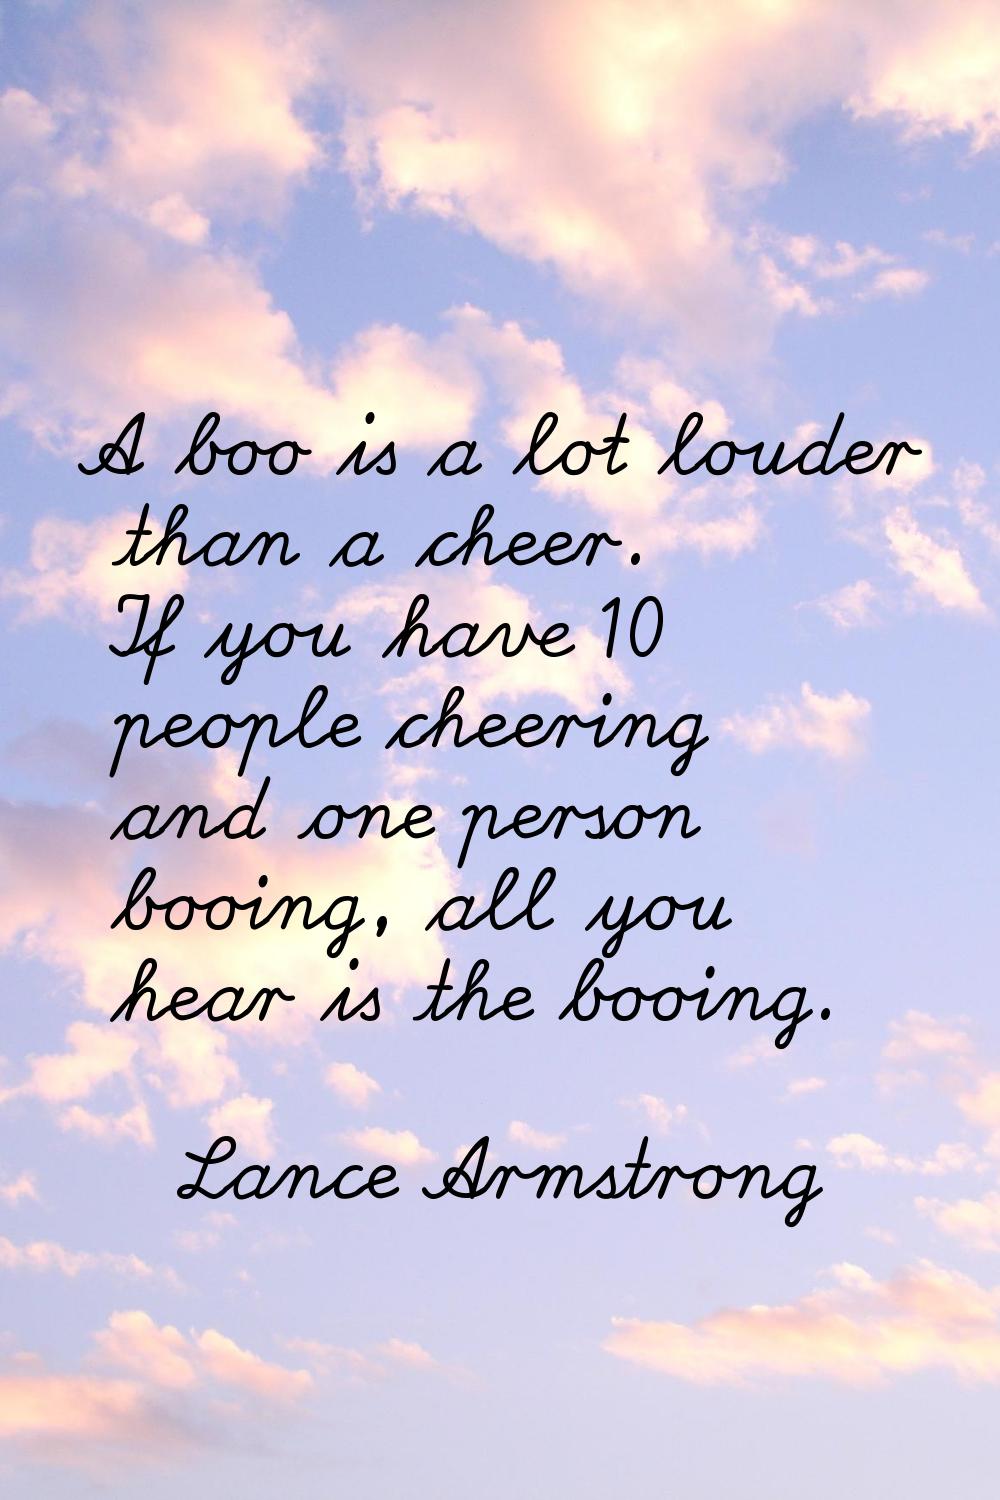 A boo is a lot louder than a cheer. If you have 10 people cheering and one person booing, all you h